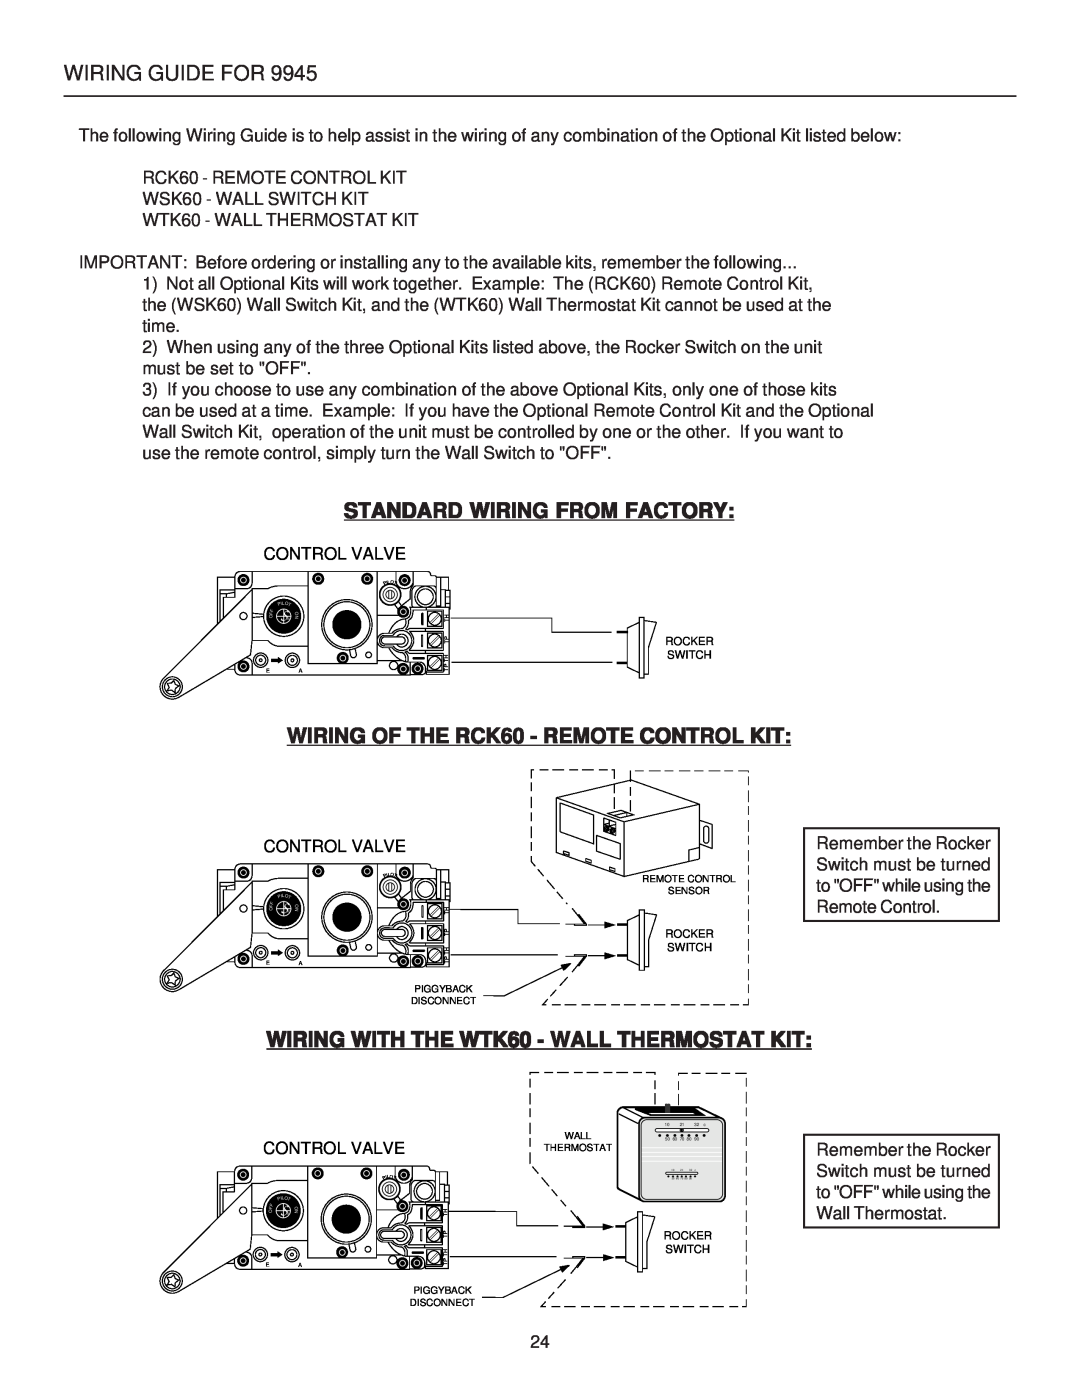 United States Stove B9945N manual Wiring Guide For, Standard Wiring From Factory, WIRING OF THE RCK60 - REMOTE CONTROL KIT 